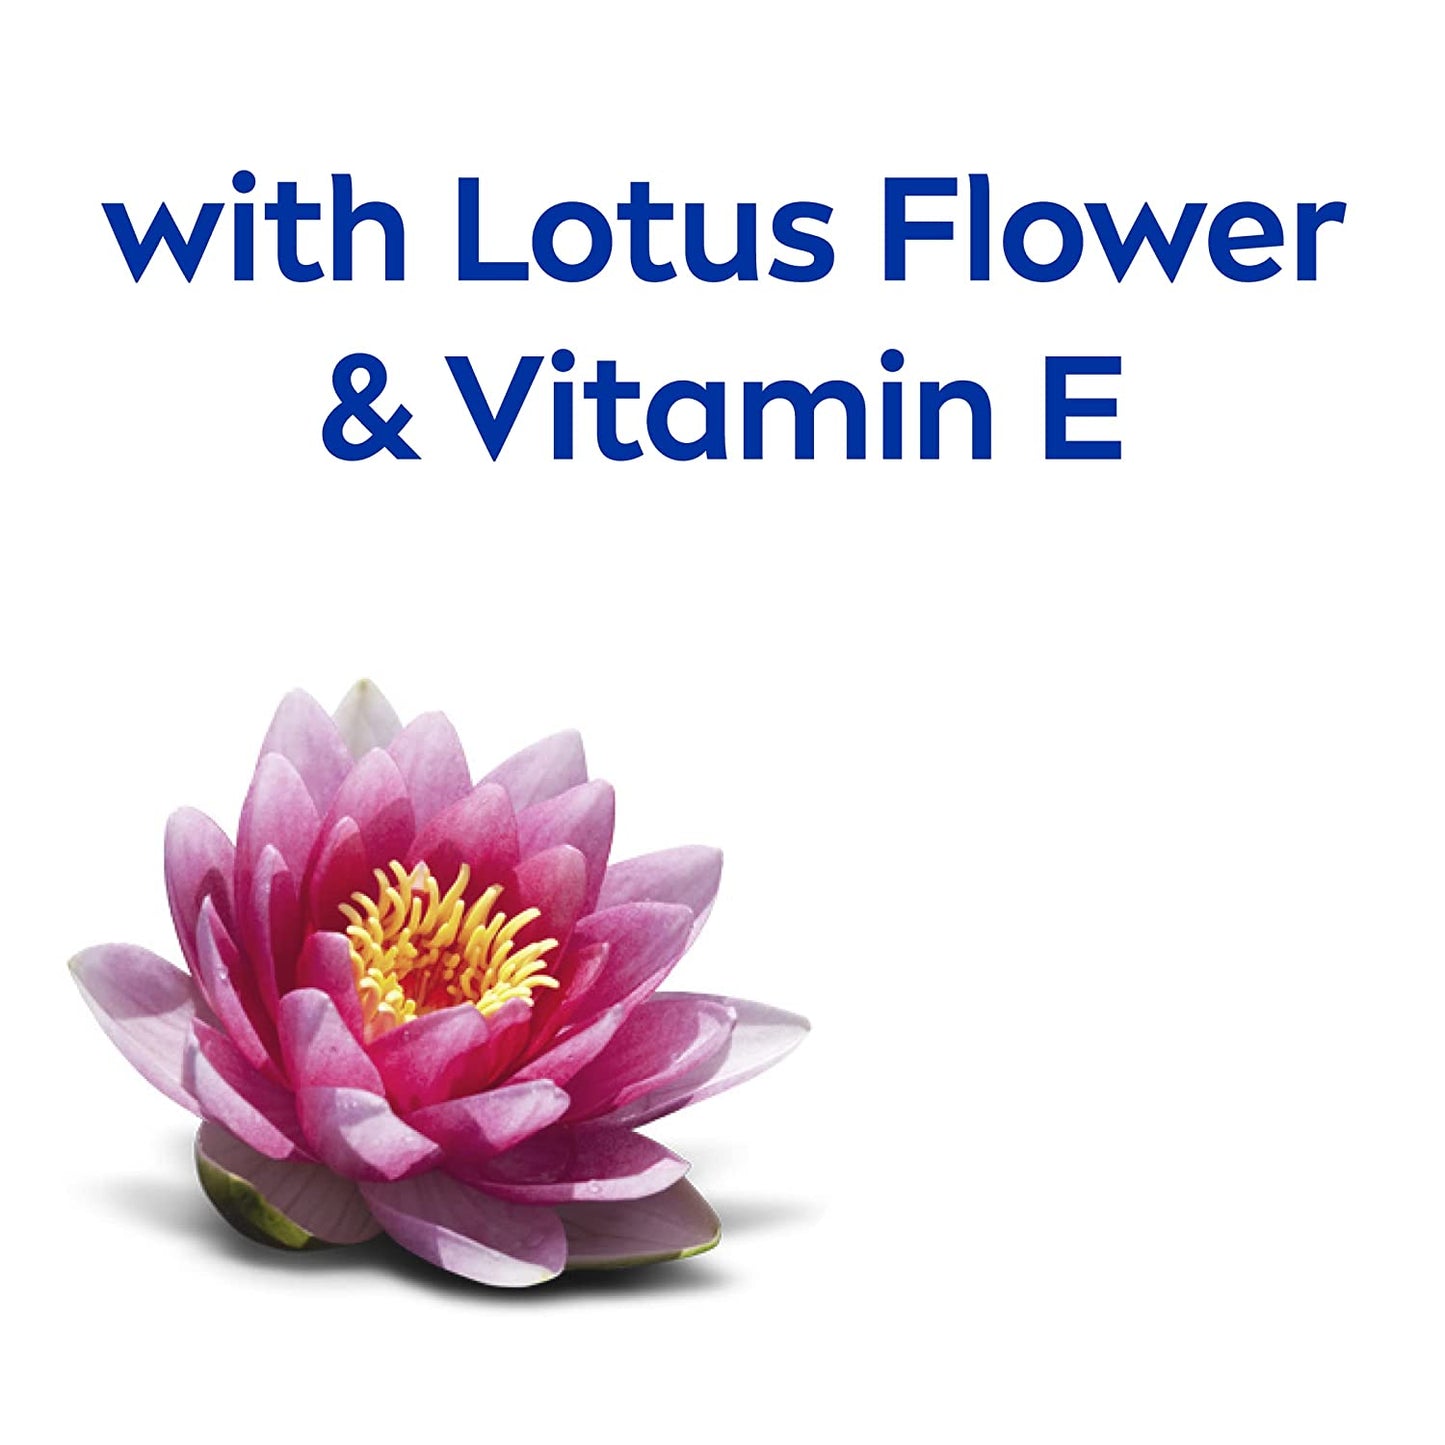 With Lotus Flower and Vitamin E